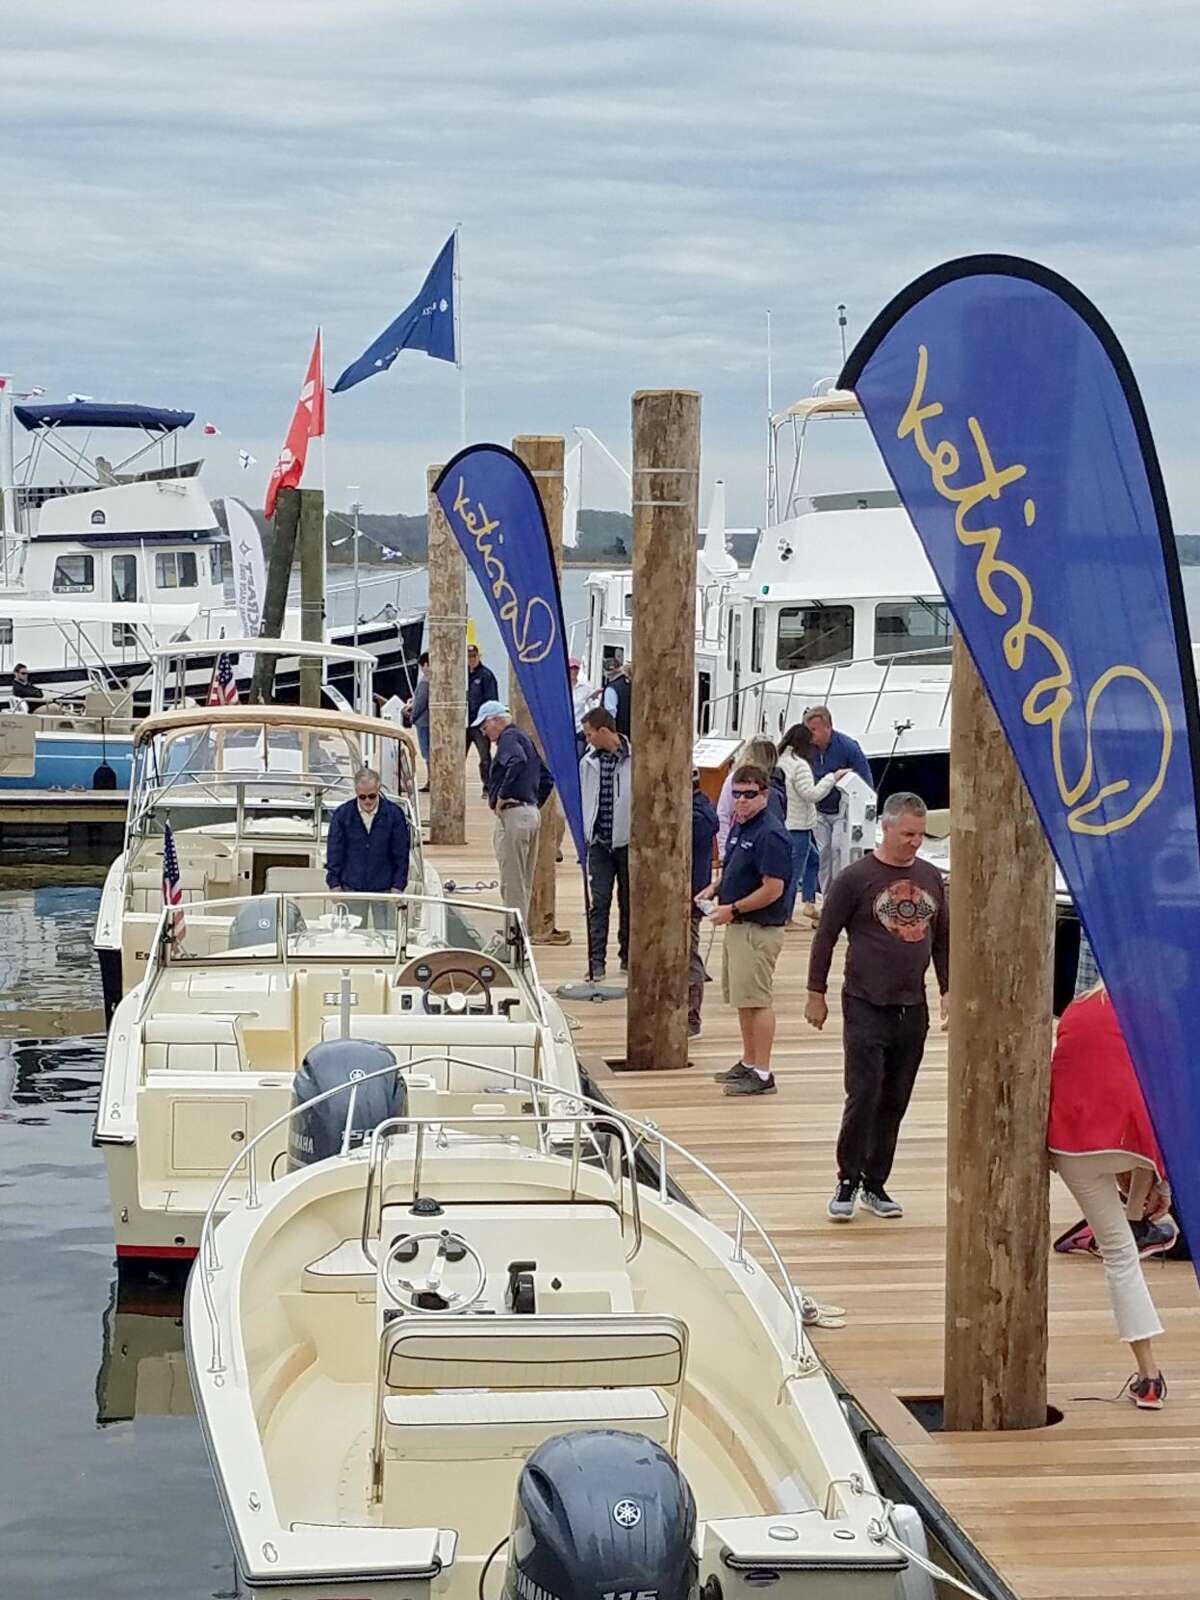 Not too big and not too small is how one visitor described the last year’s boat show in Essex. File photo.